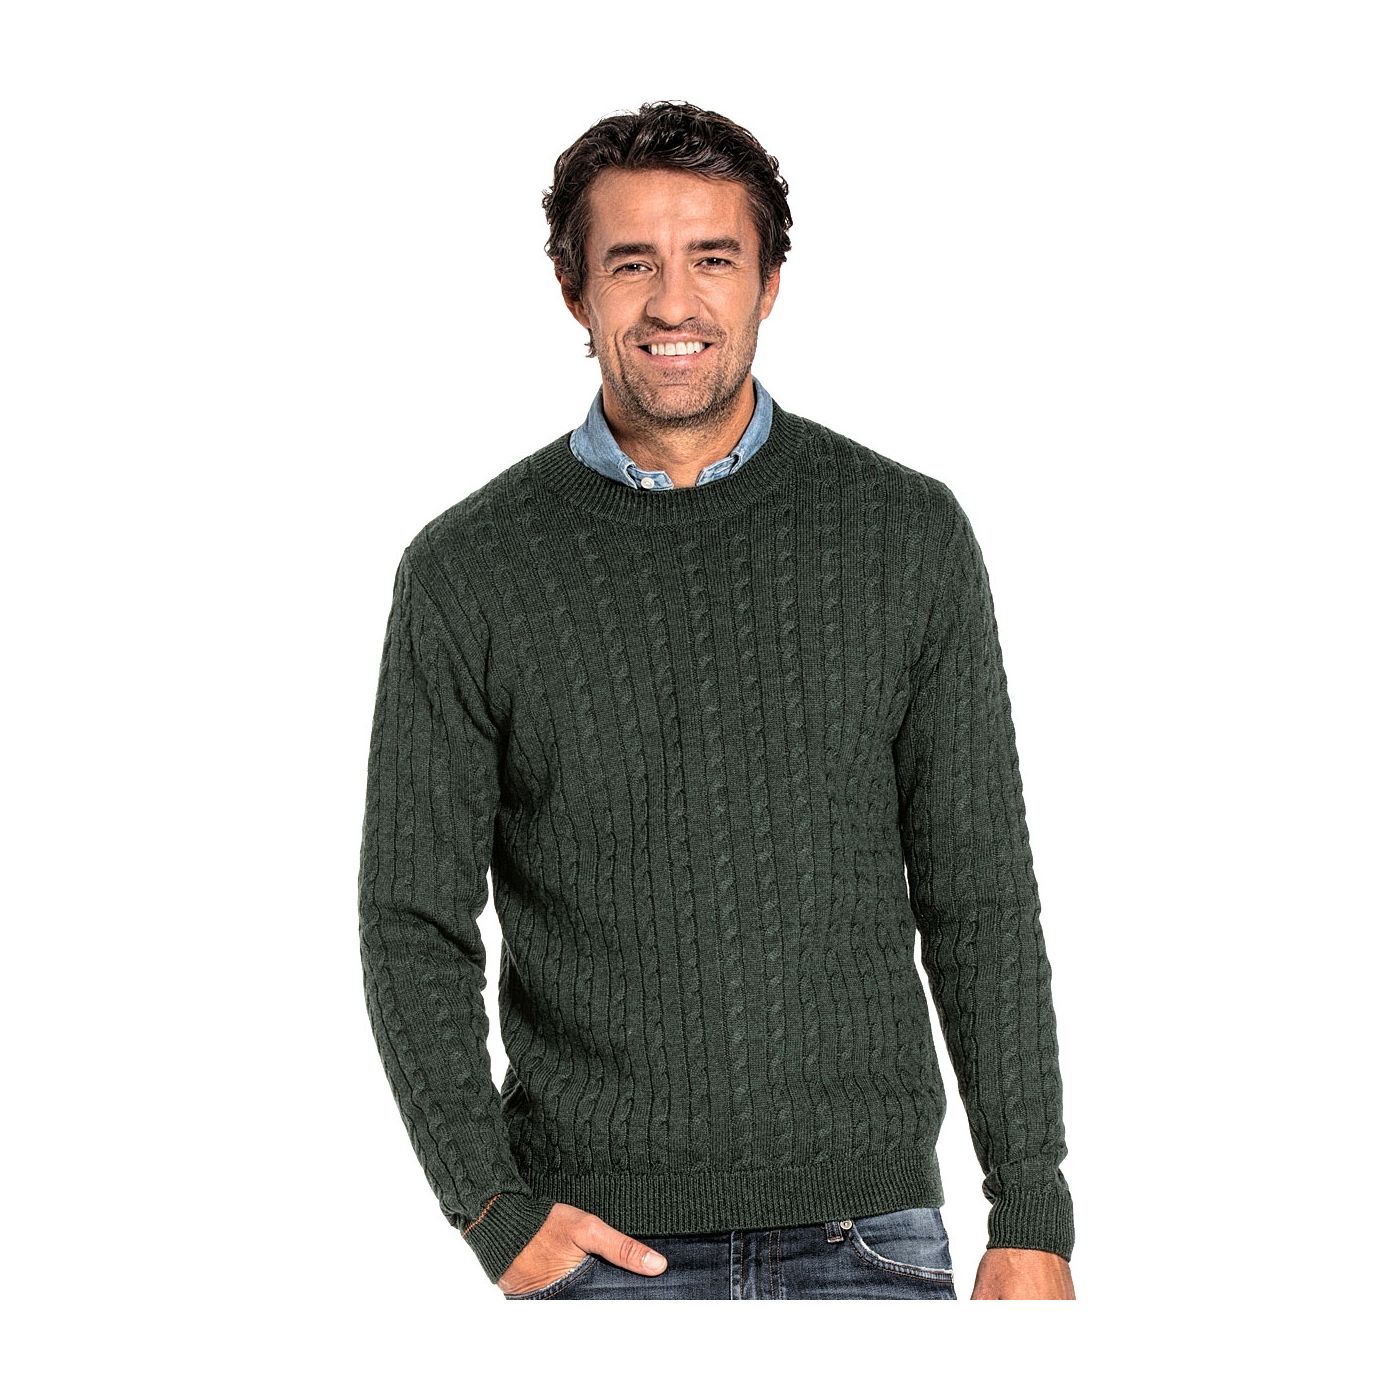 Cable knit sweater for men made of Merino wool in Dark green